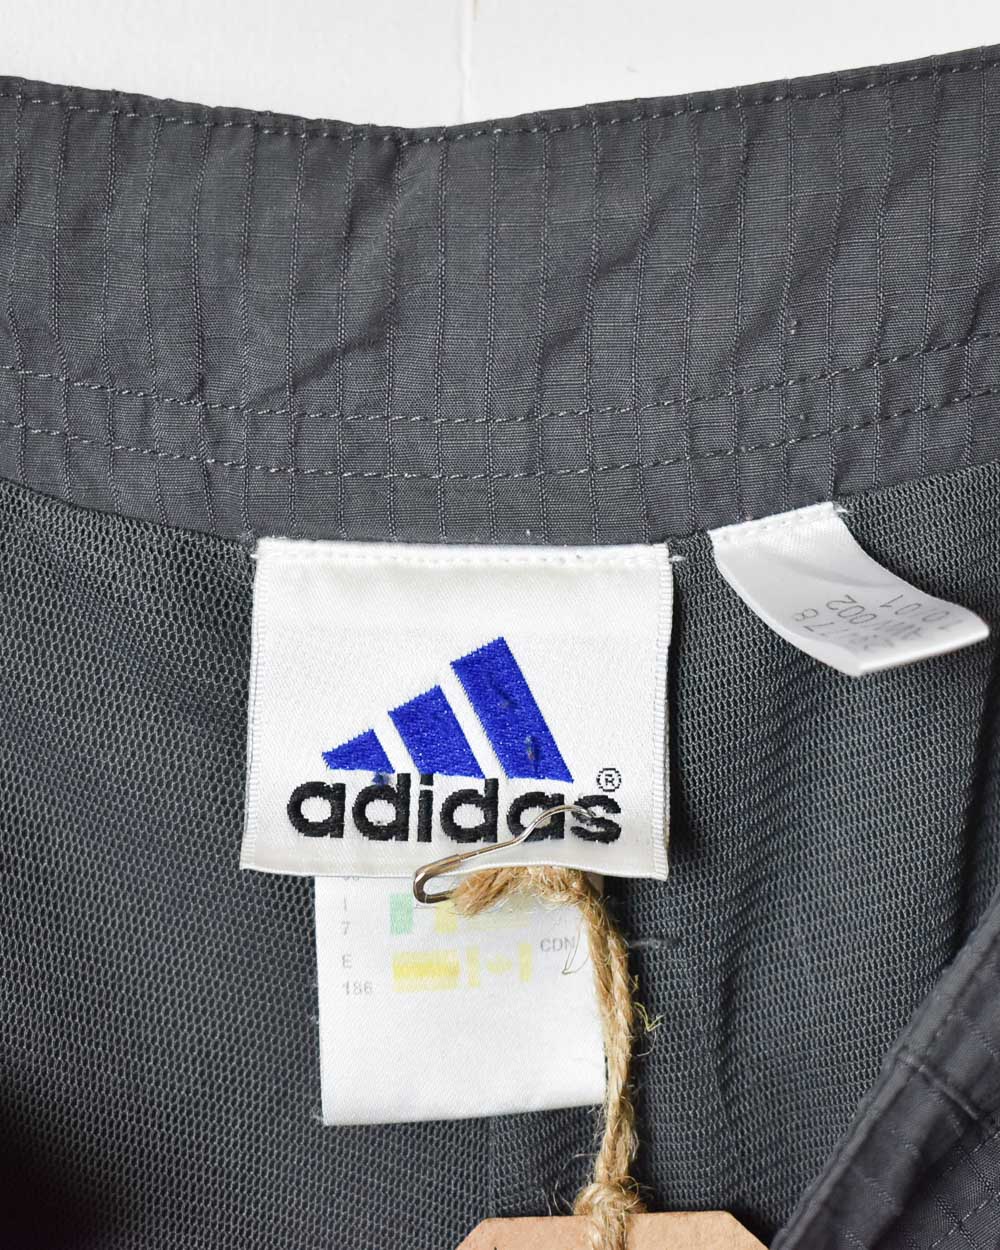 Grey Adidas Double Knee Tracksuit Bottoms - Large